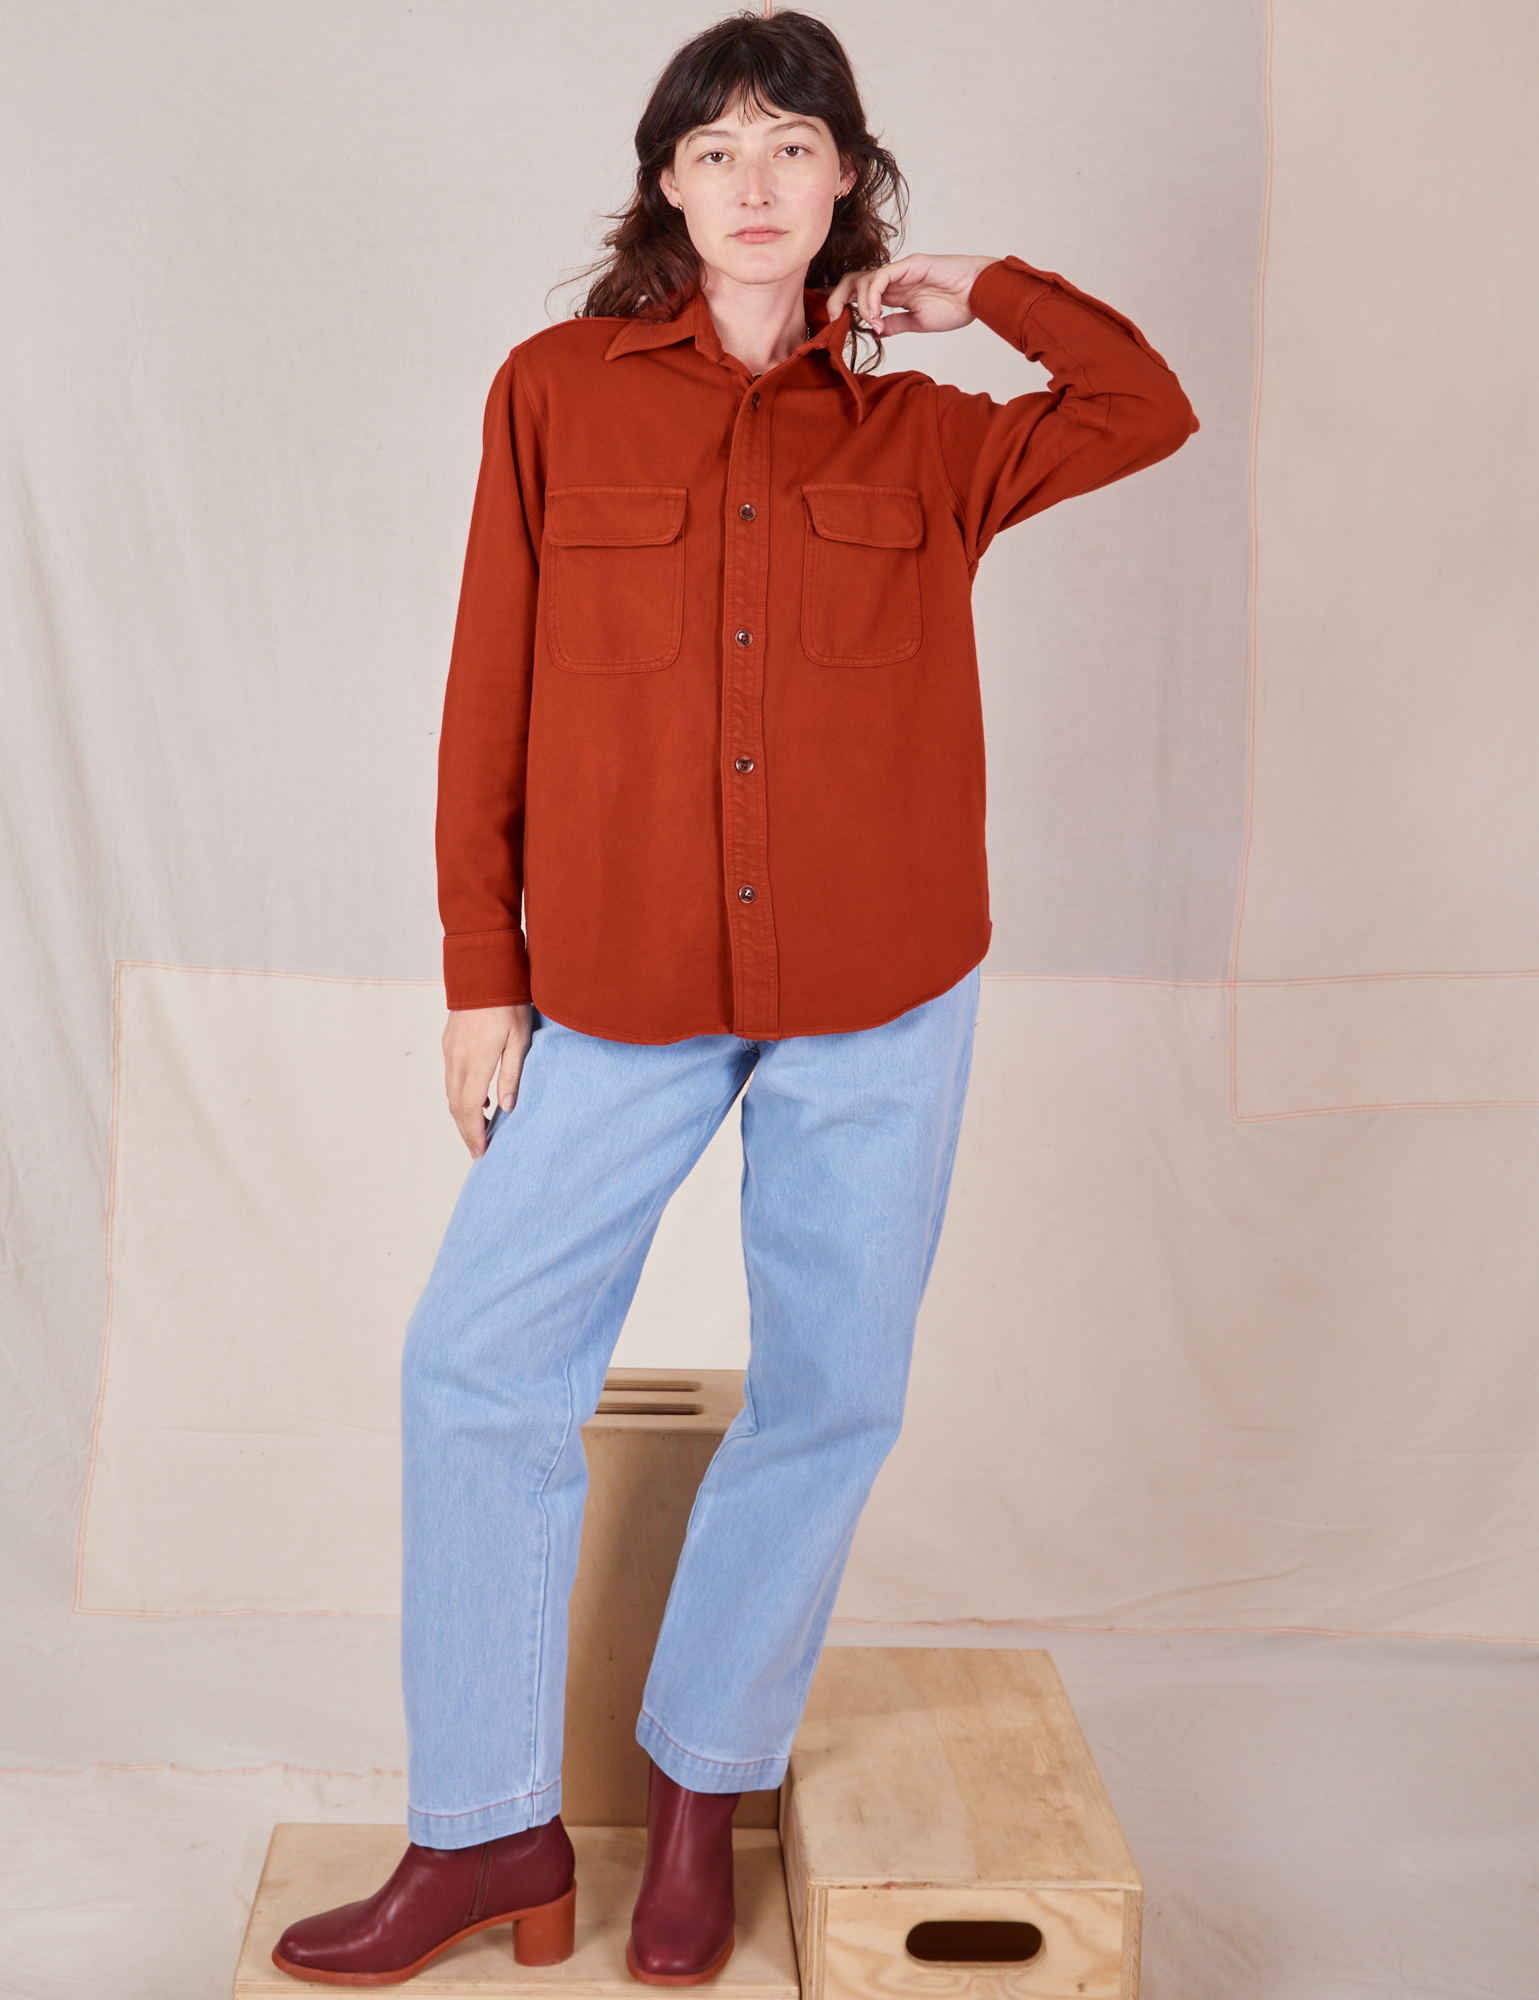 Alex is 5'8" and wearing P Flannel Overshirt in Paprika paired with light wash Trouser Jeans